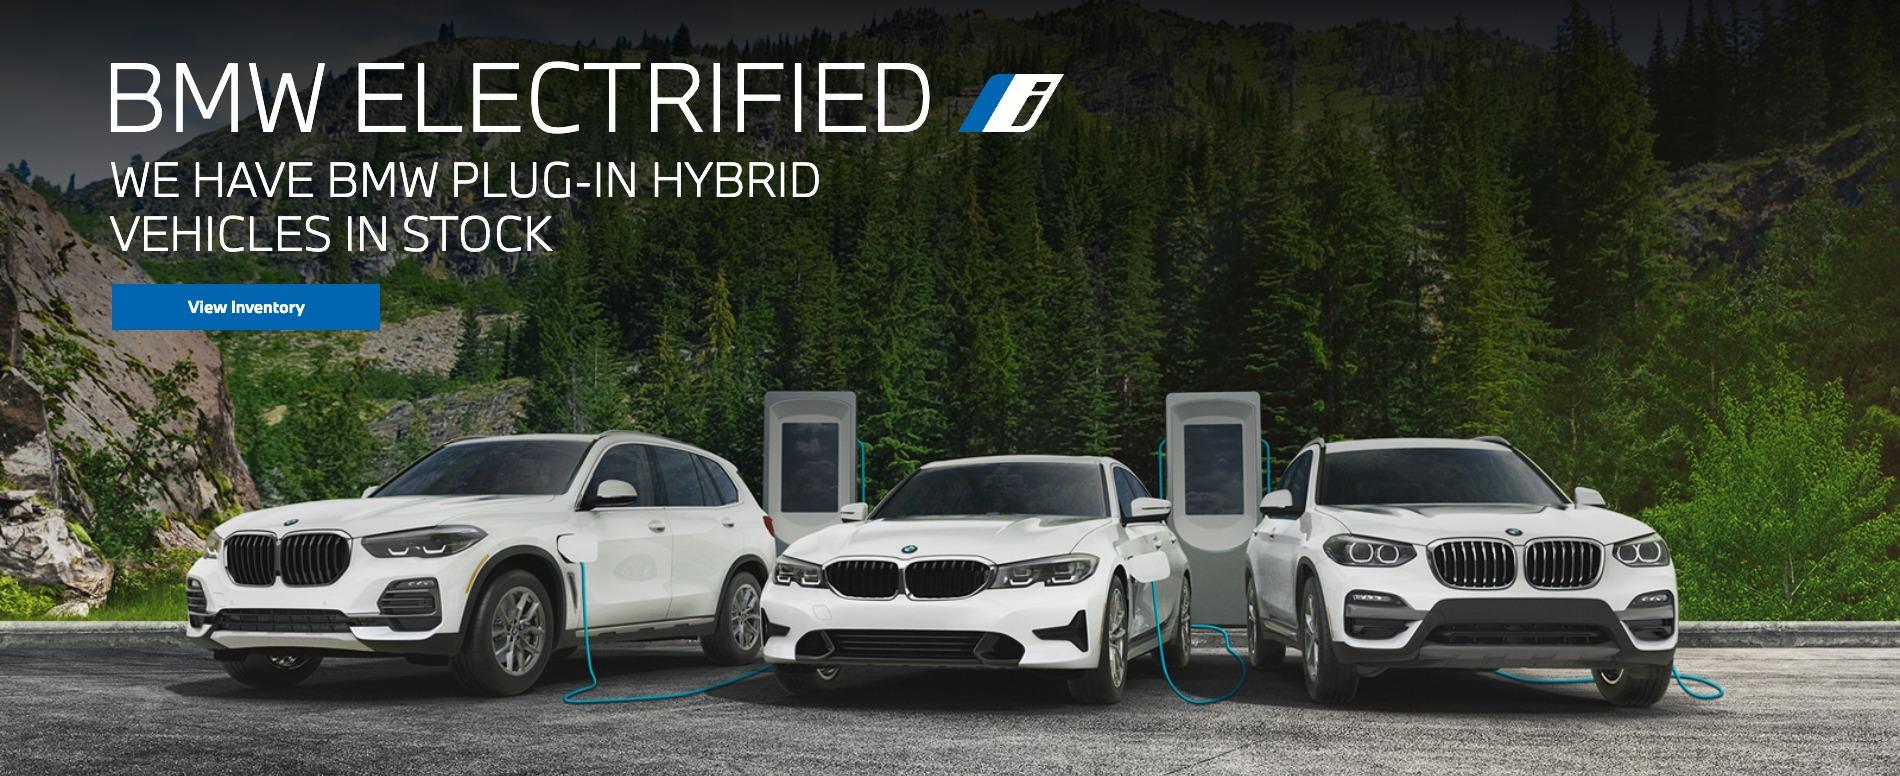 BMW Plug-In Hybrid Vehicles in Stock